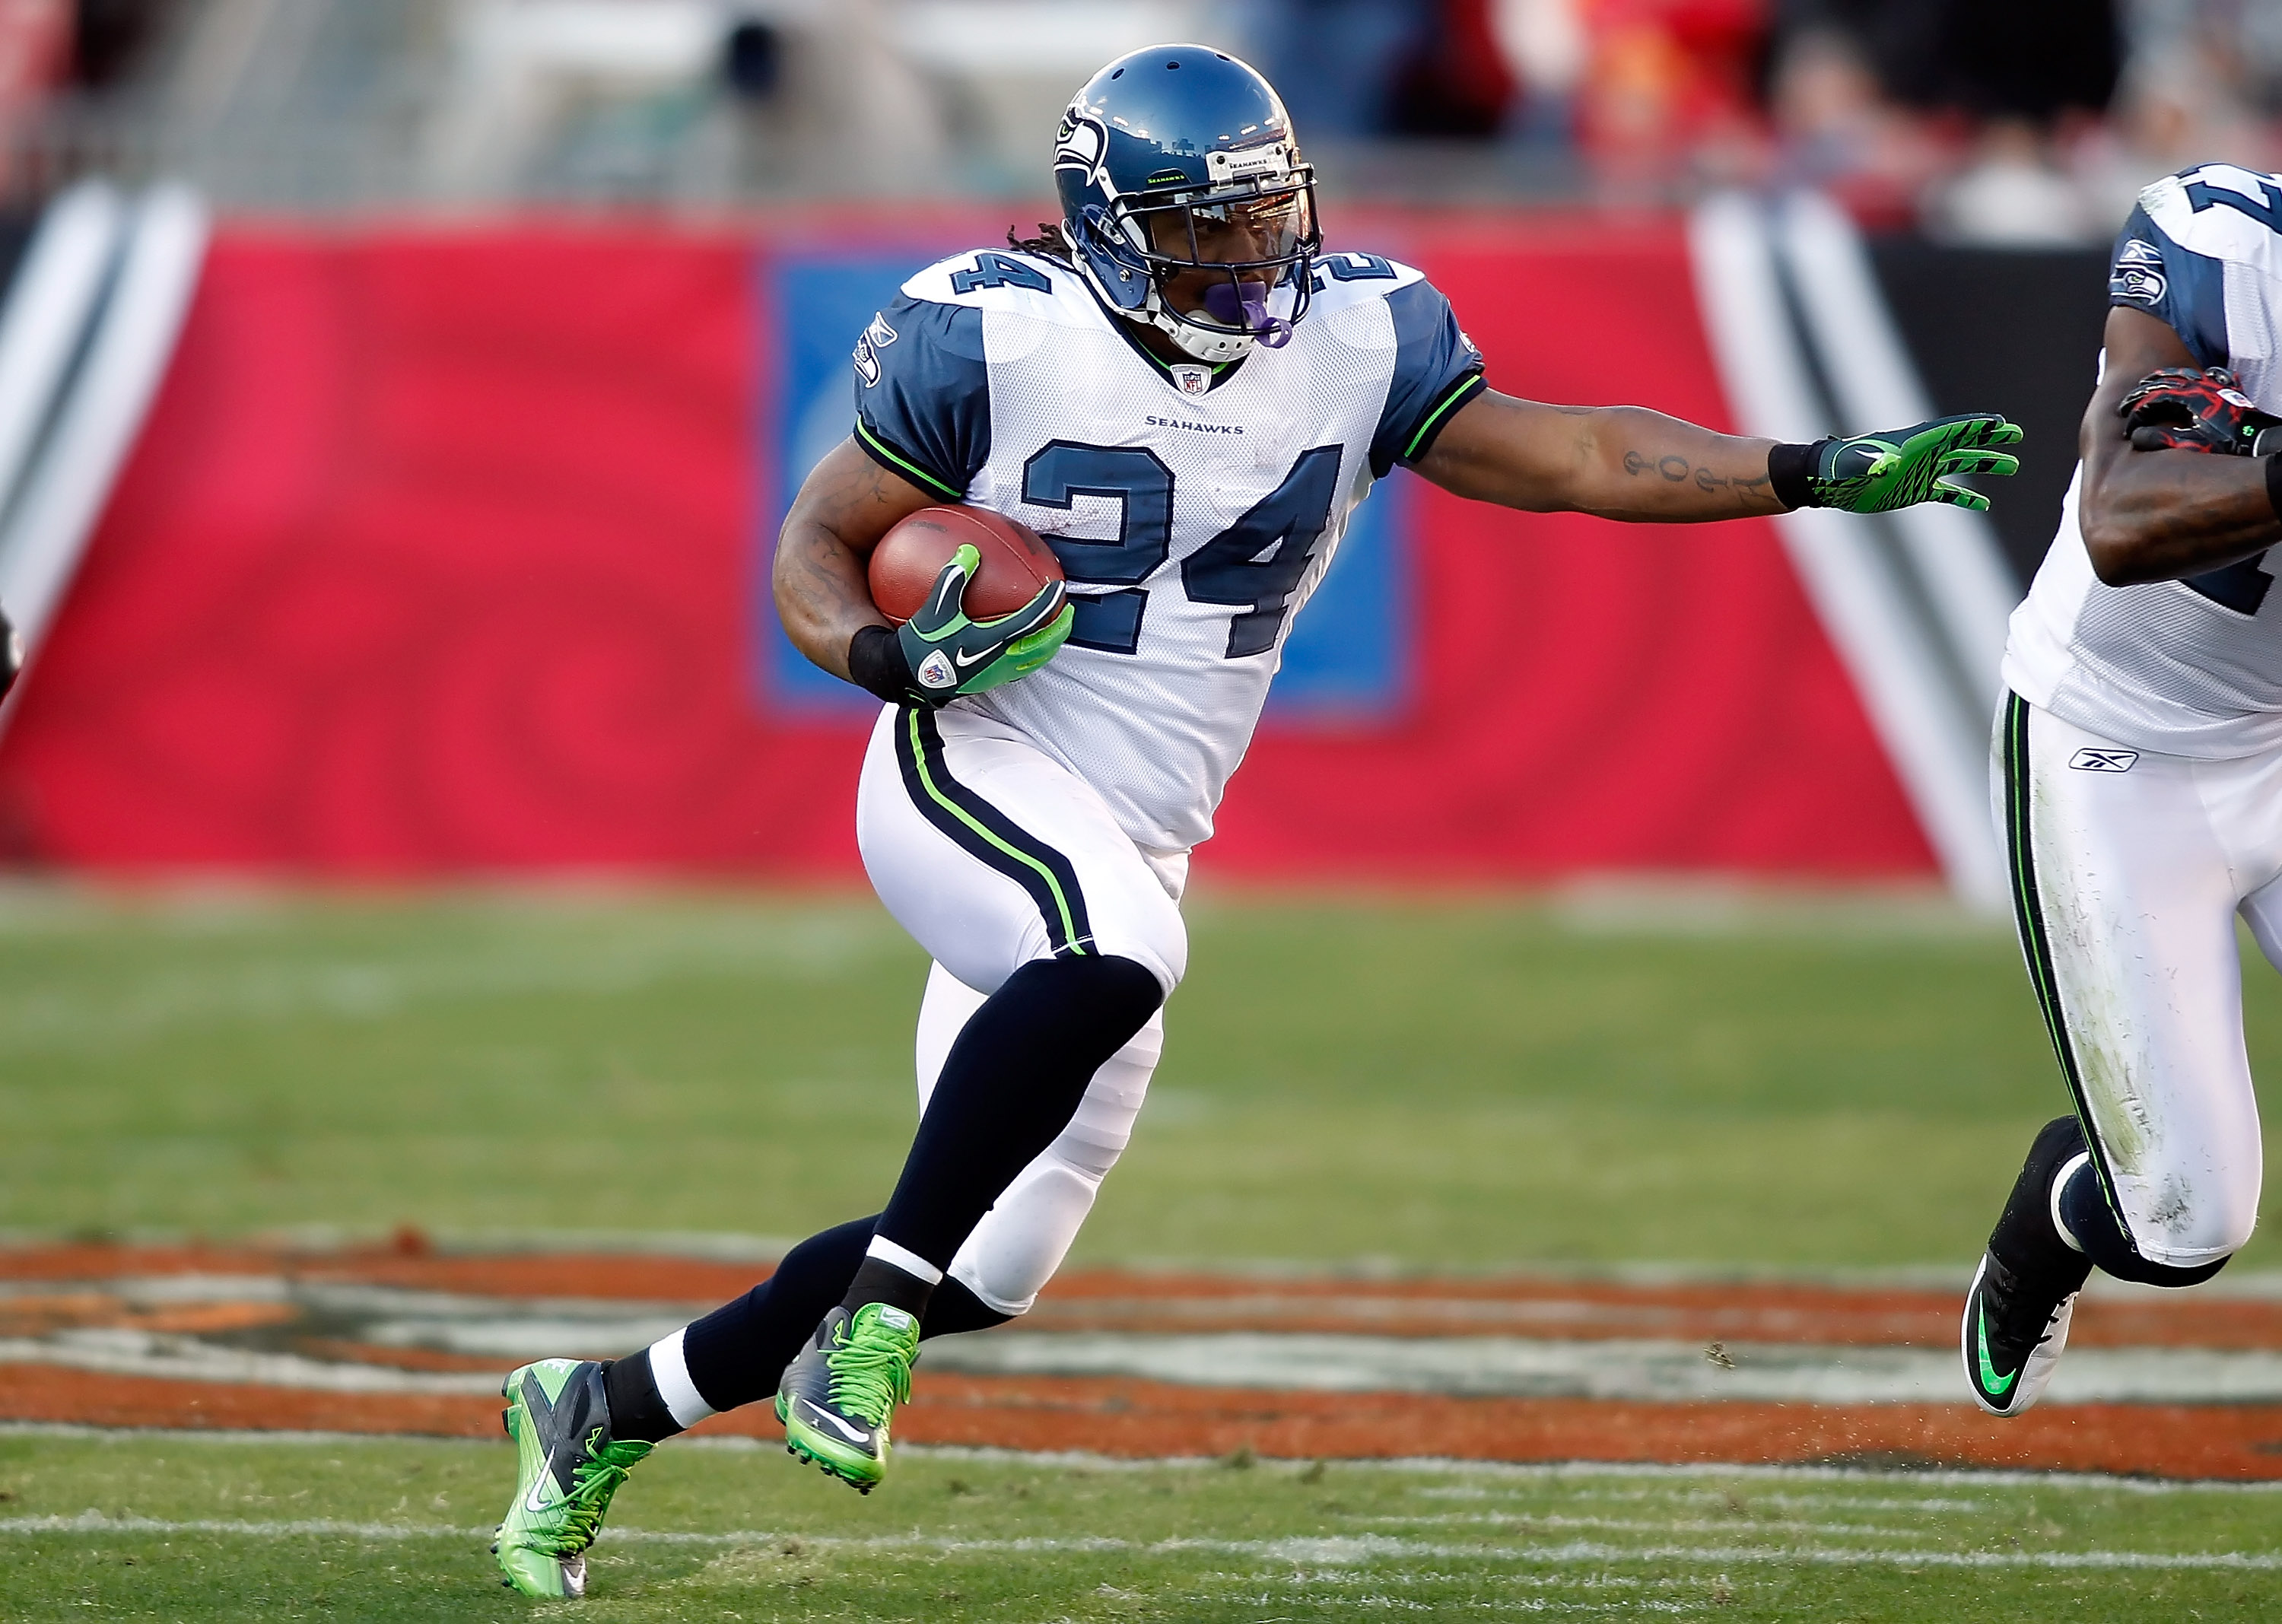 TAMPA, FL - DECEMBER 26: Running back Marshawn Lynch #24 of the Seattle Seahawks runs the ball against the Tampa Bay Buccaneers during the game at Raymond James Stadium on December 26, 2010 in Tampa, Florida. (Photo by J. Meric/Getty Images)